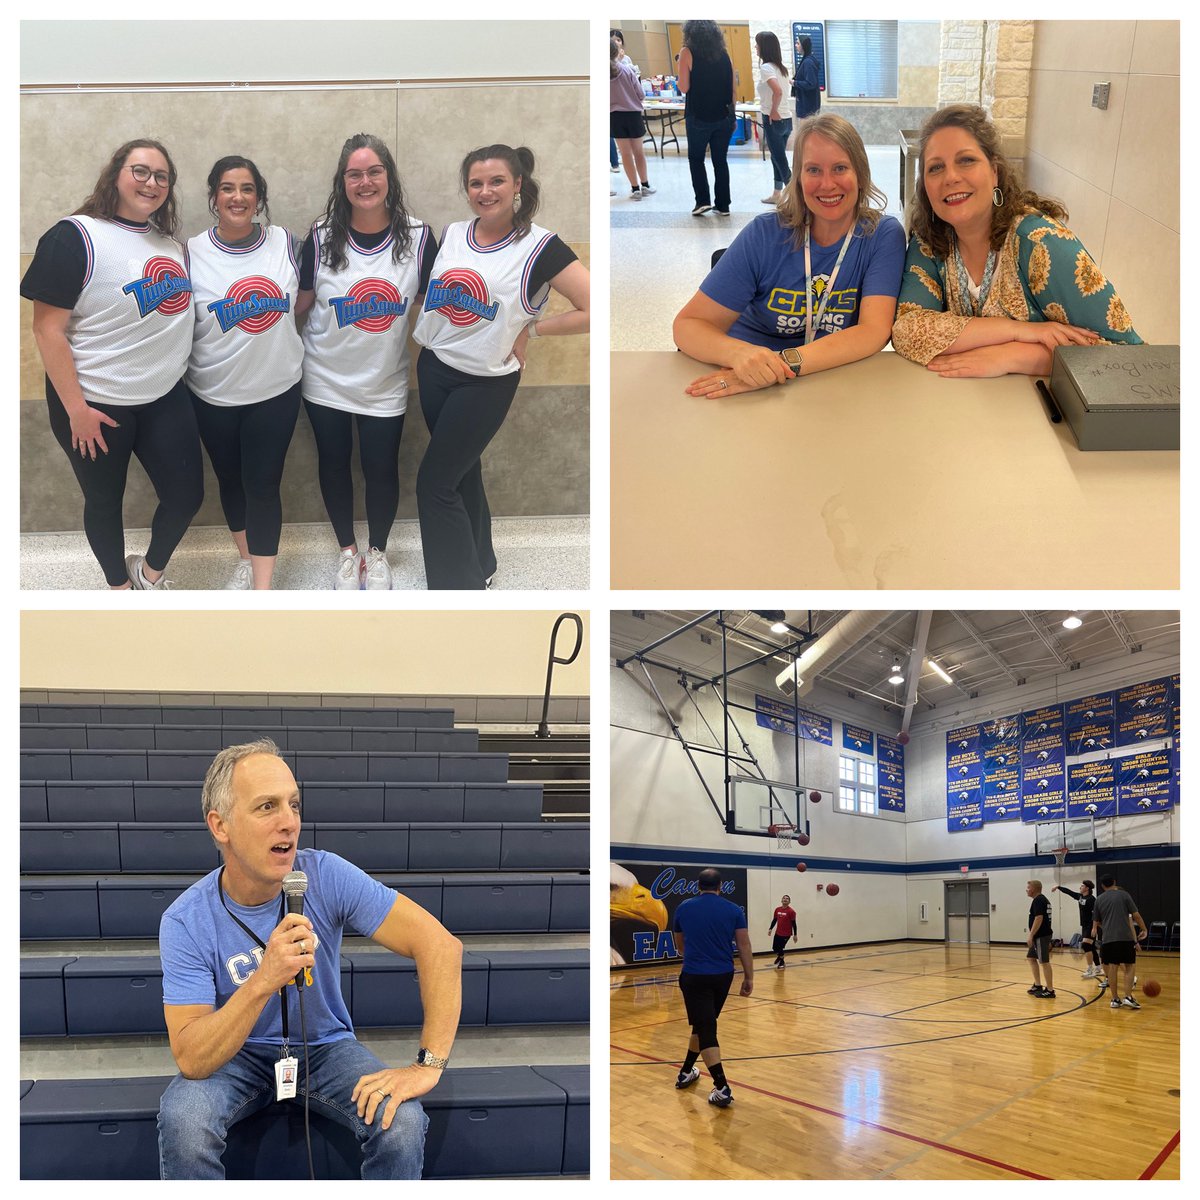 Our annual Rumble at the Ridge bball game of faculty vs @CRMS_Athletics students is such fun bringing together the Eagle community. It was a nail biter today & so thankful for an exciting event put together by our StuCo student leaders! #TeachersGetTheWin #SoaringTogether💙🦅💛